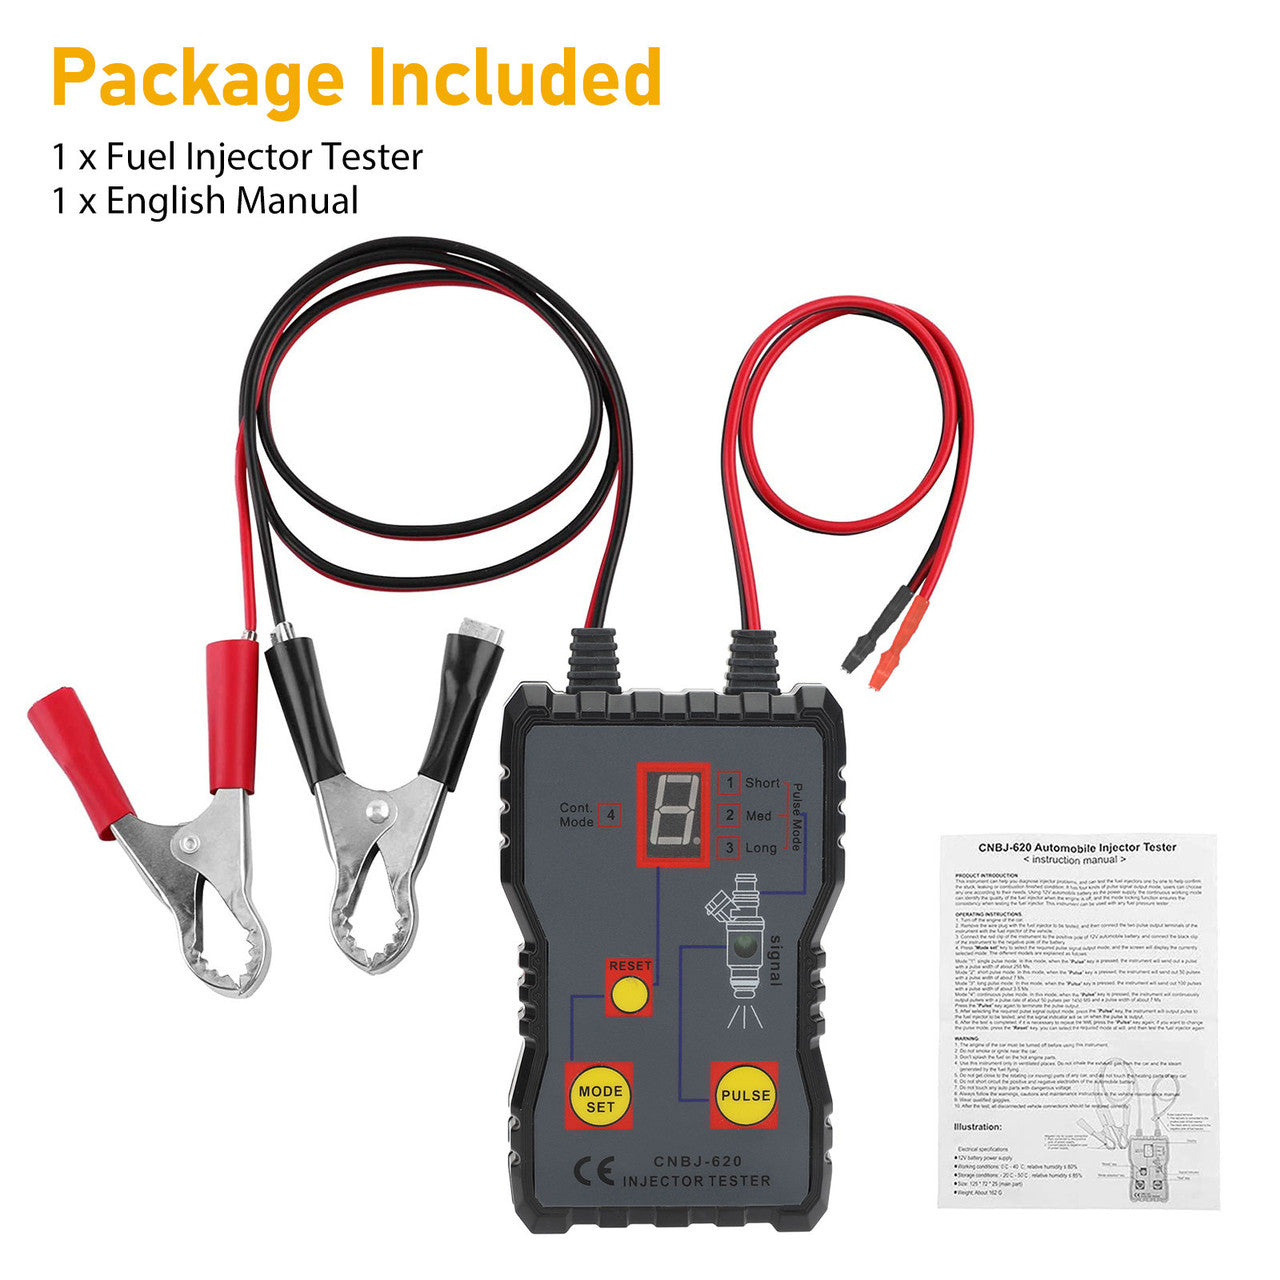 Car Fuel Injector Tester - Comes With An LED Display And 4 Pulse Modes